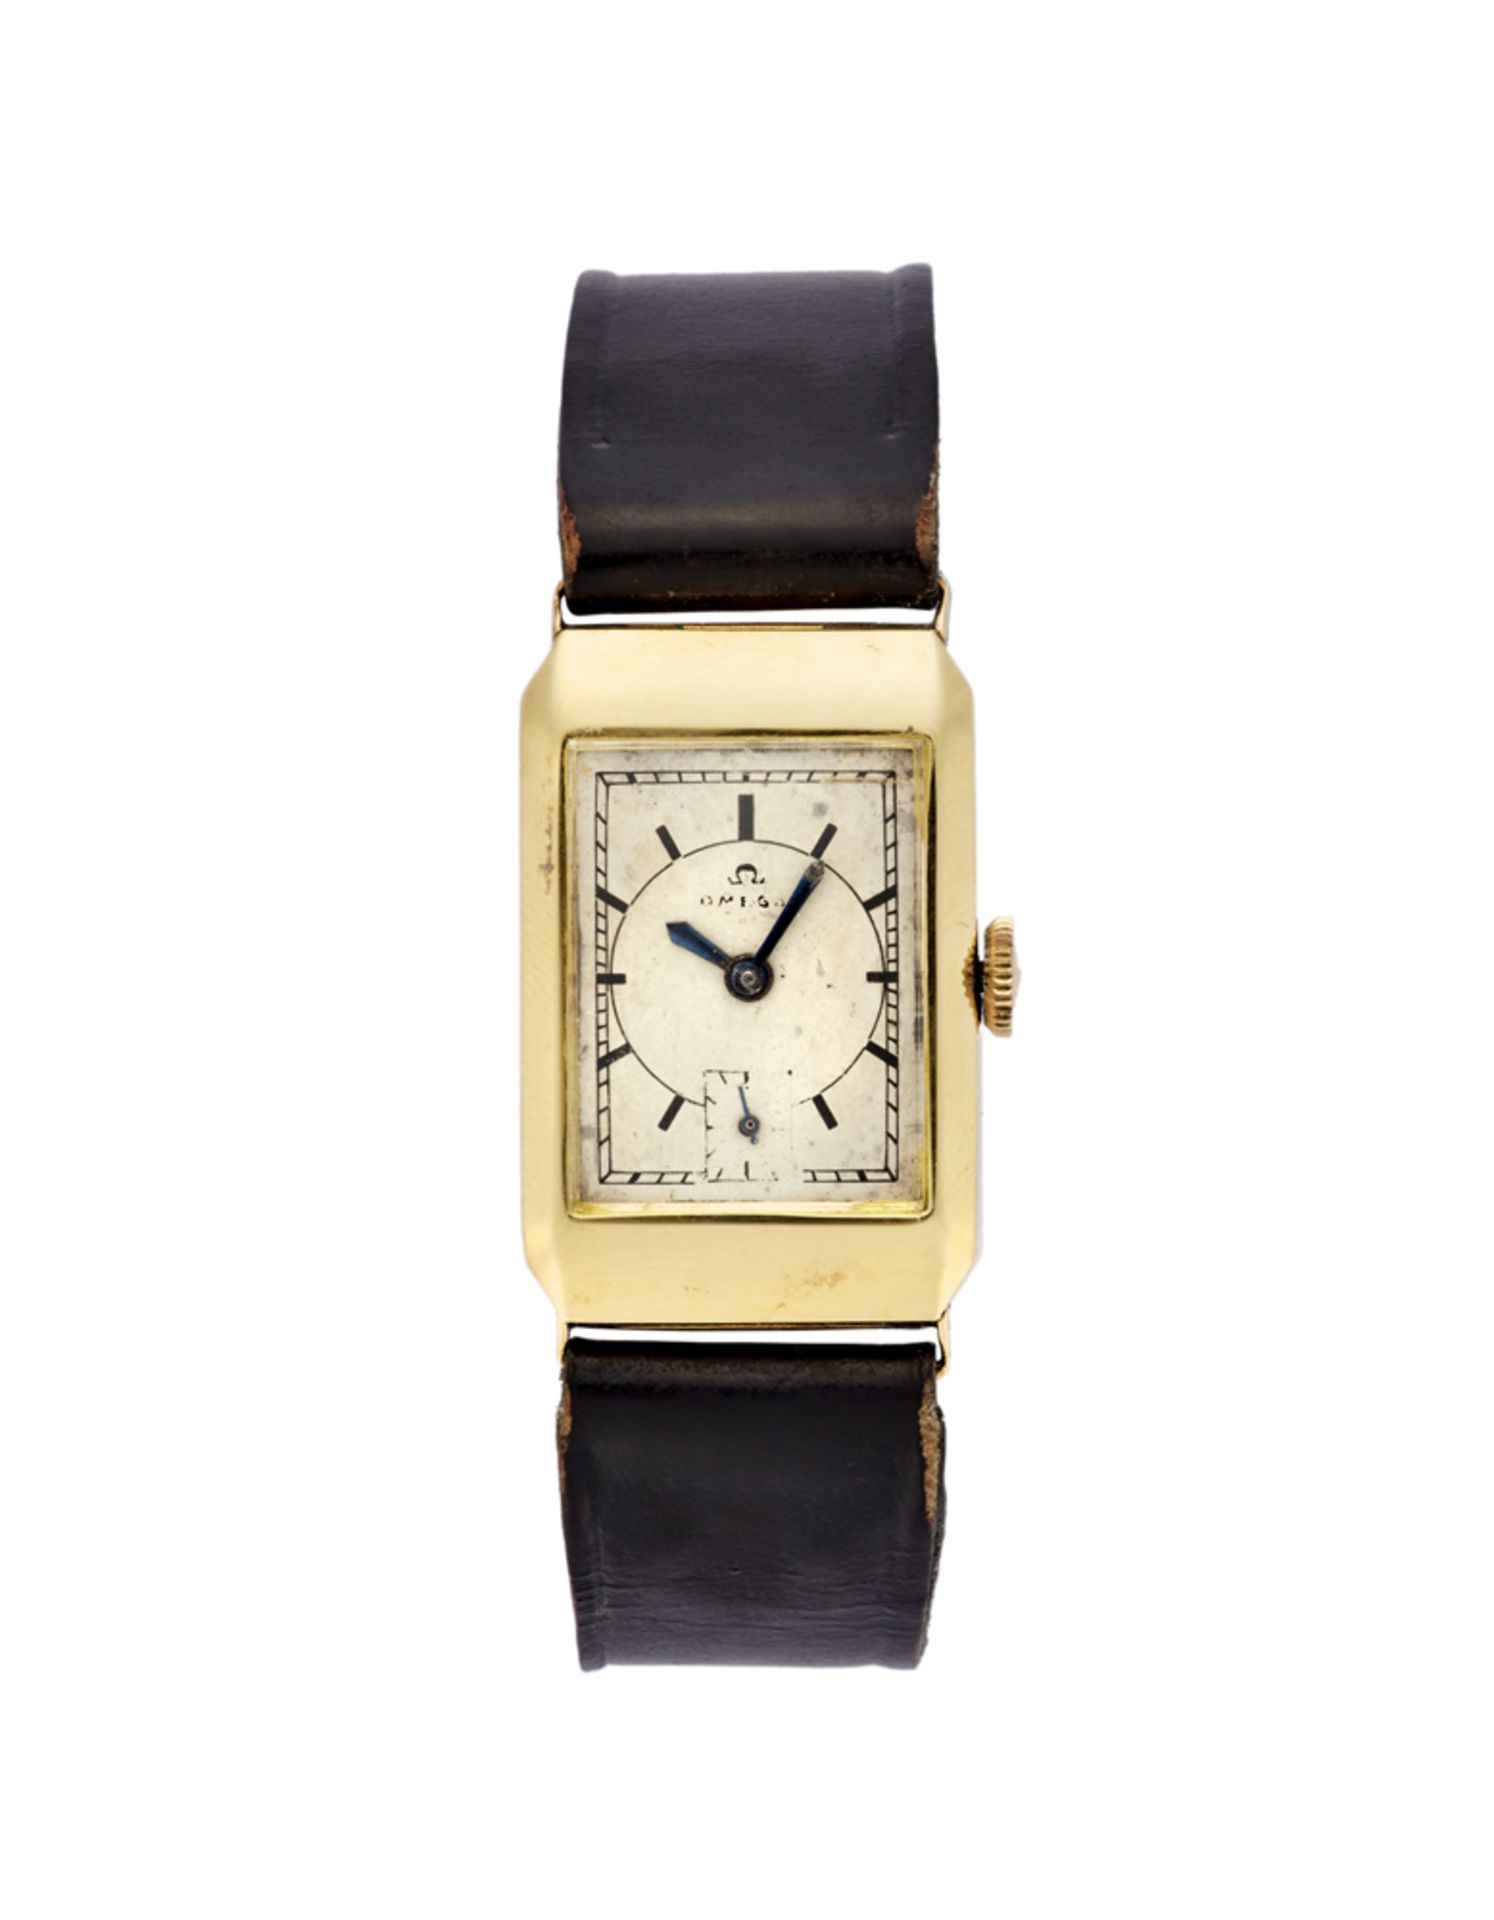 OMEGAGent's 18K gold wristwatch1930sDial, movement and case signedManual-wind movementSilvered